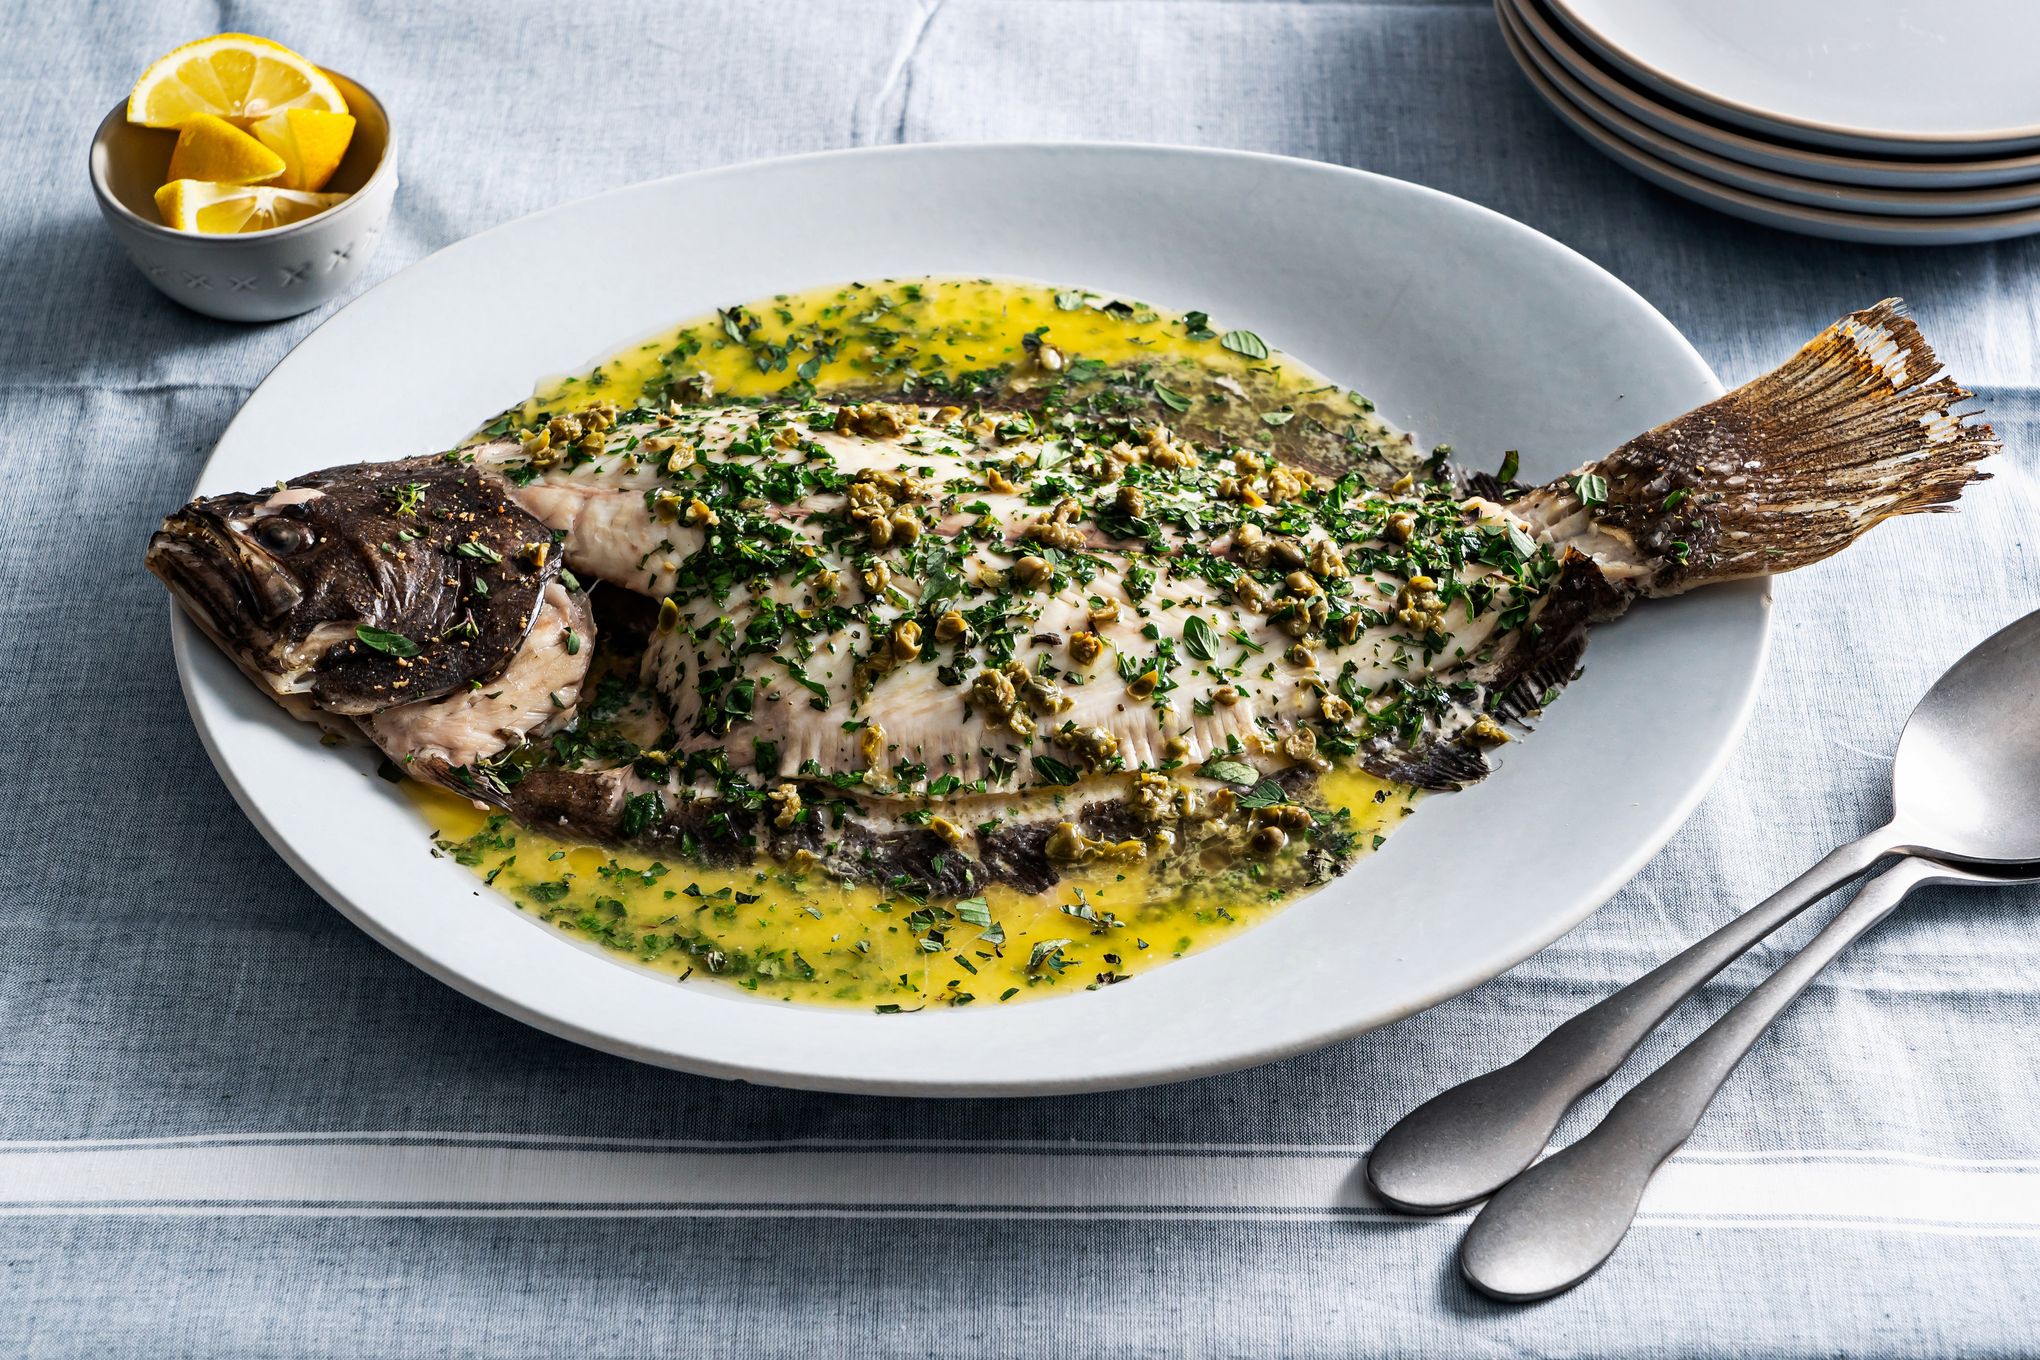 Baked whole flounder with herb butter is a 30-minute dinner worth